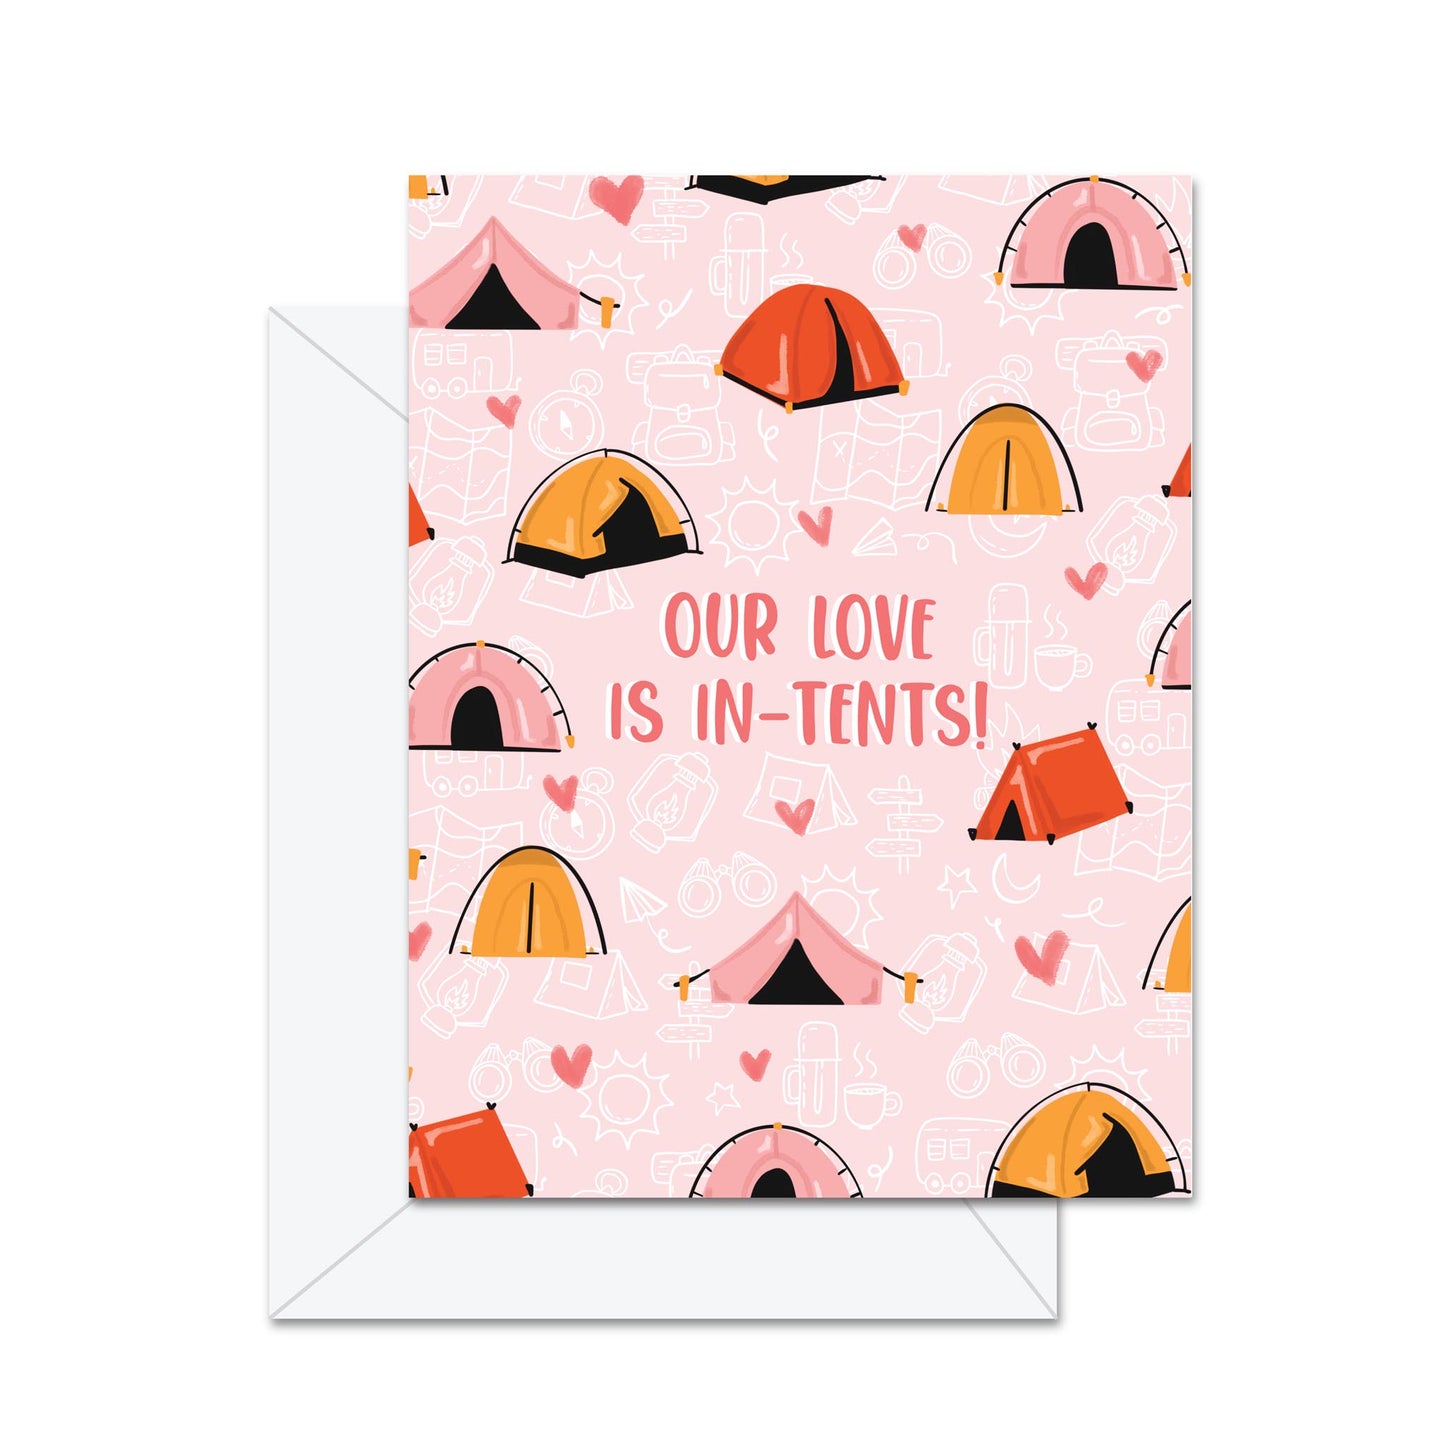 Our Love is In-Tents! - Greeting Card